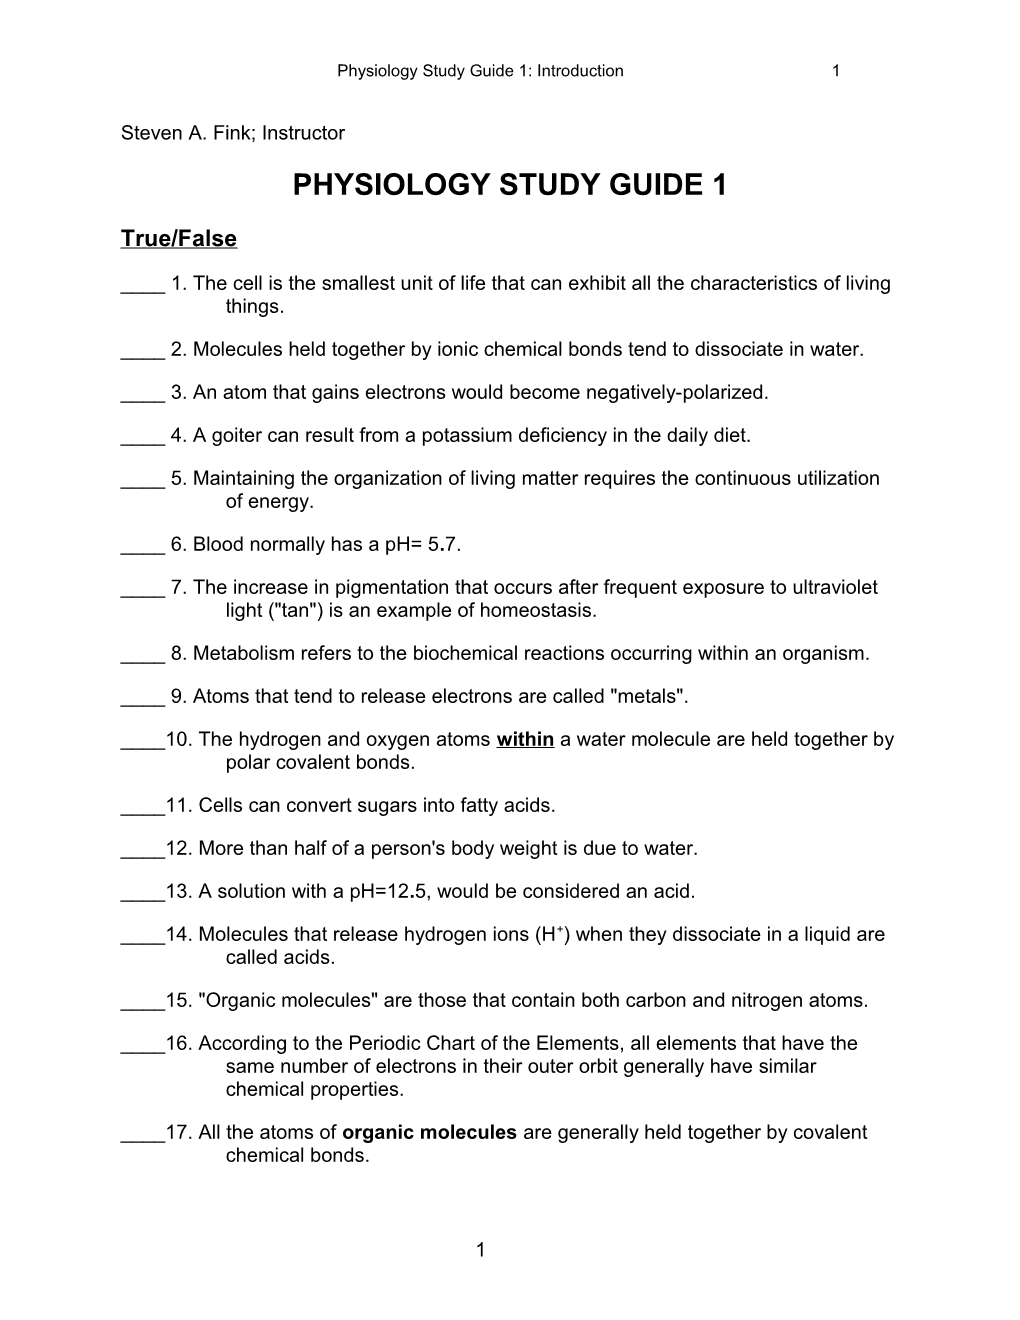 Physiology Study Guide 1: Introduction1